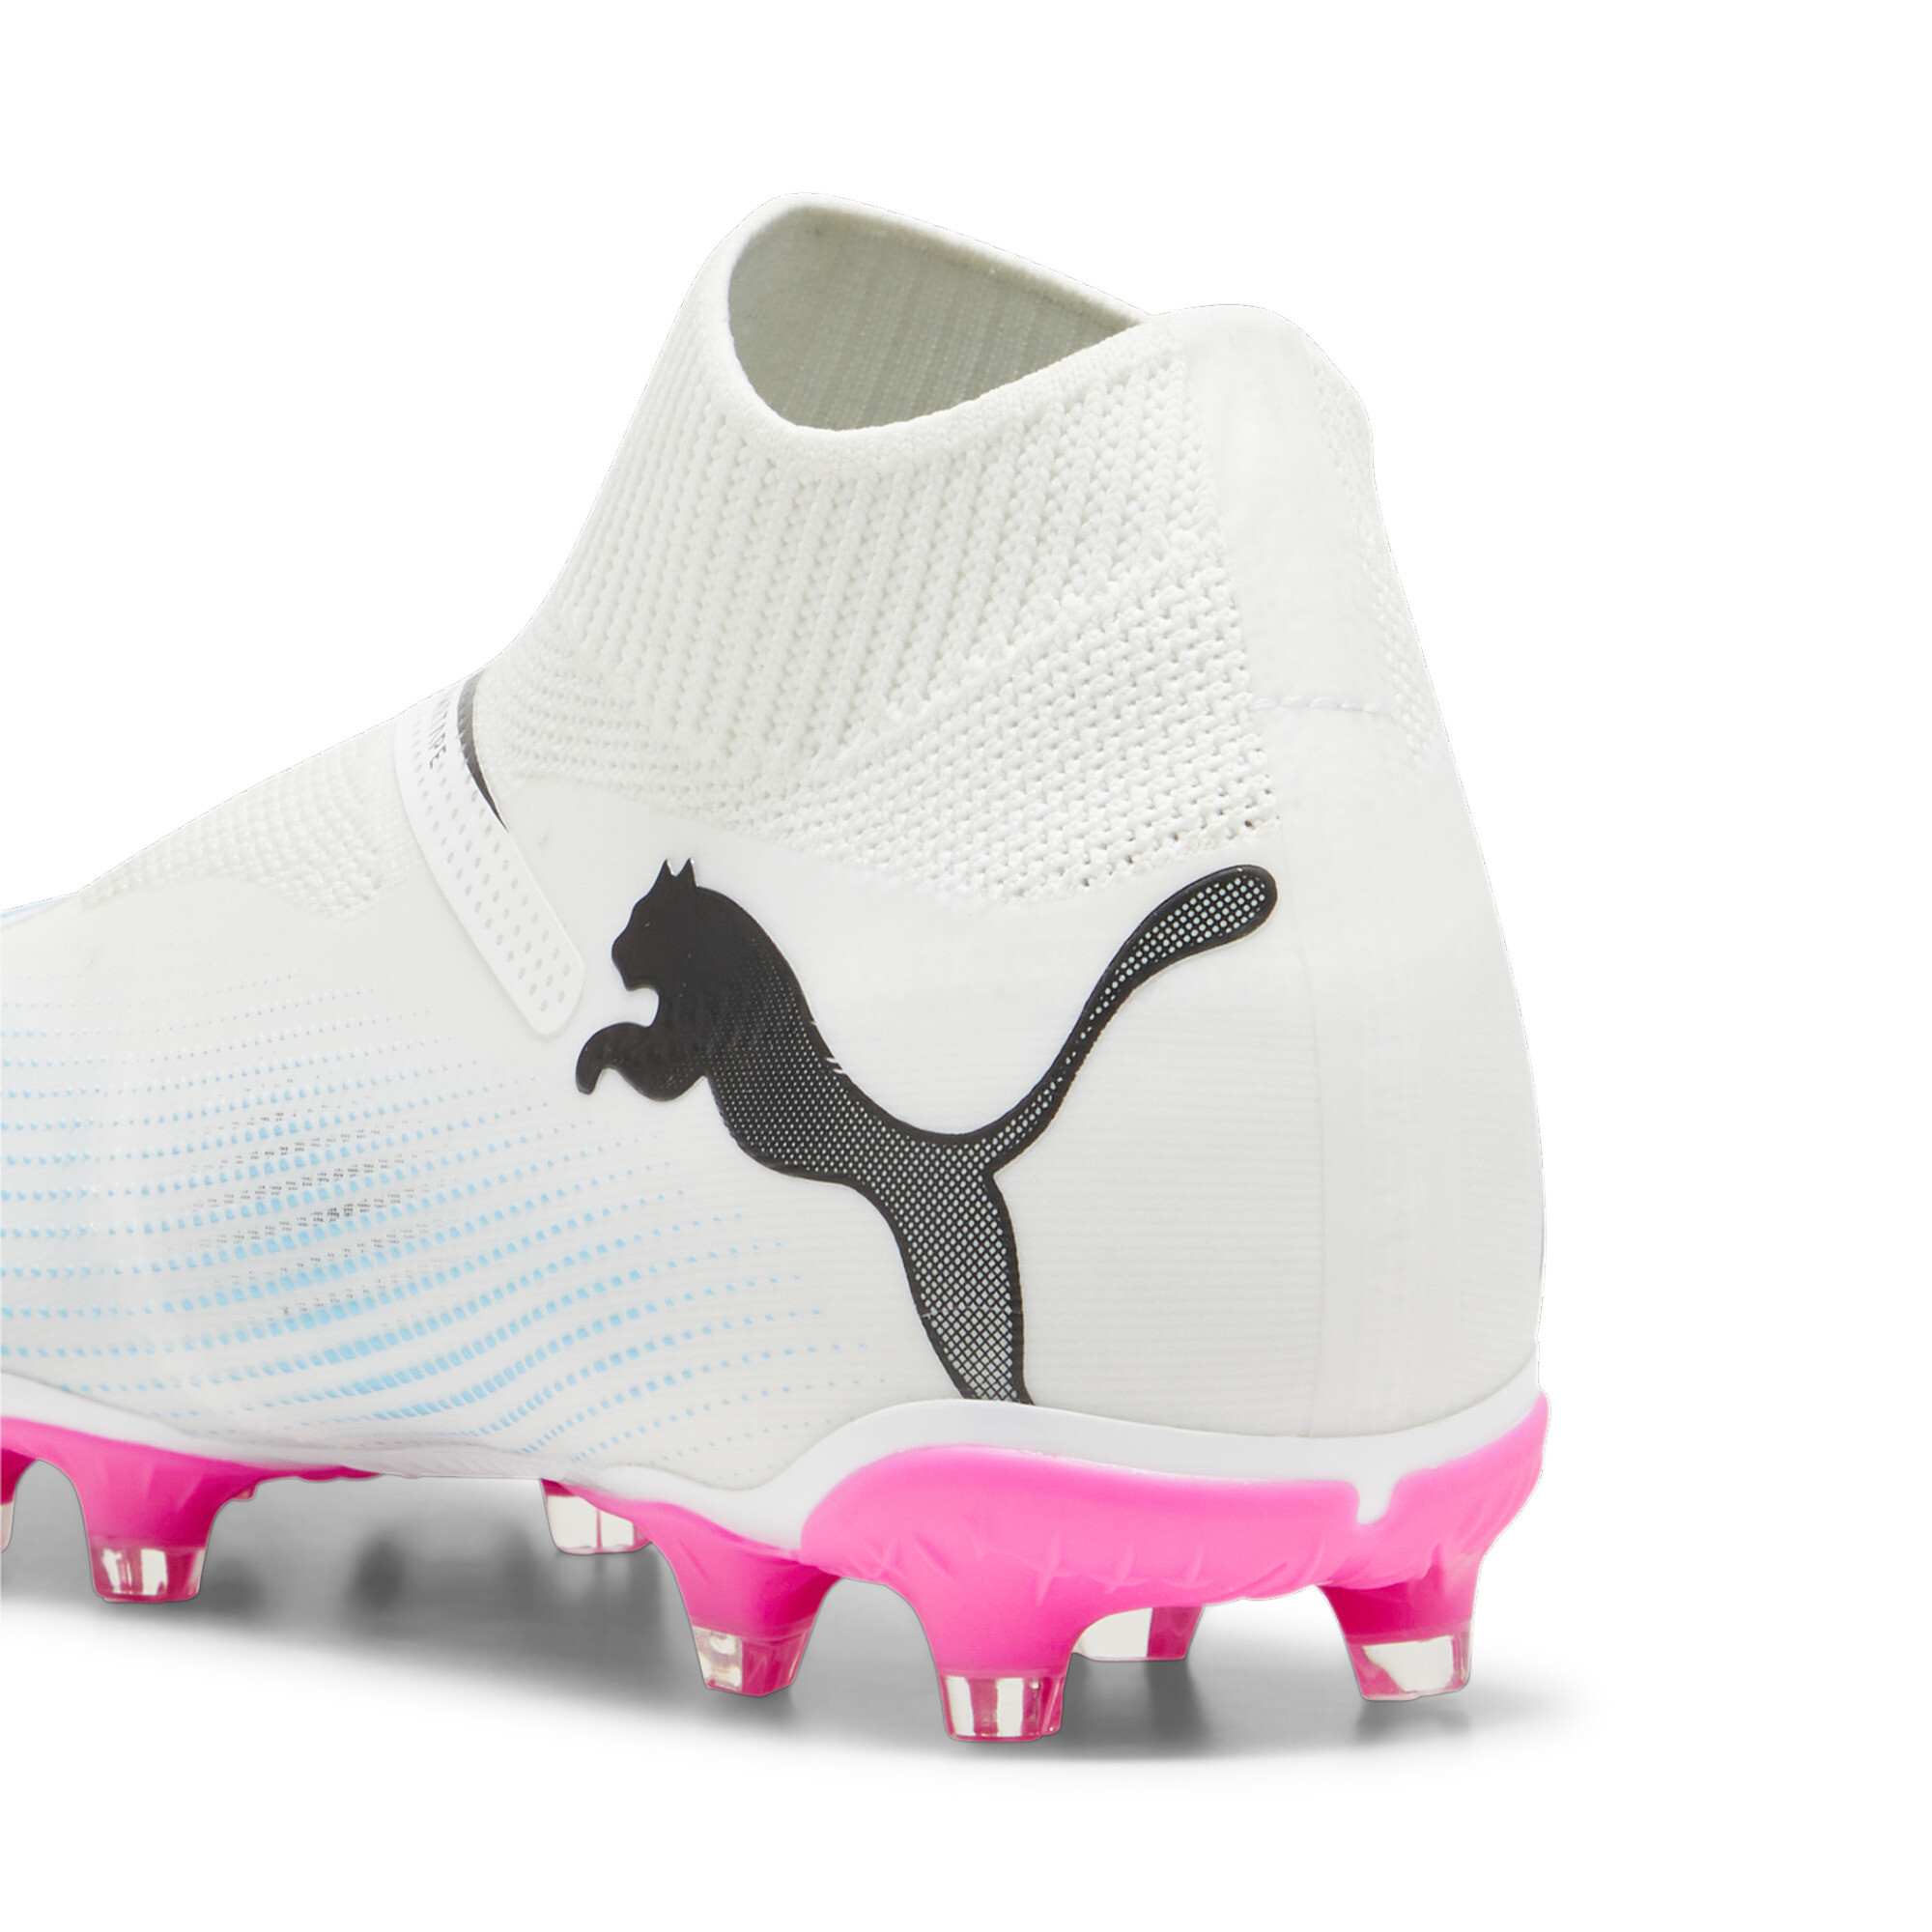 Men's PUMA FUTURE 7 MATCH FG/AG Laceless Football Boots In White/Pink, Size EU 45